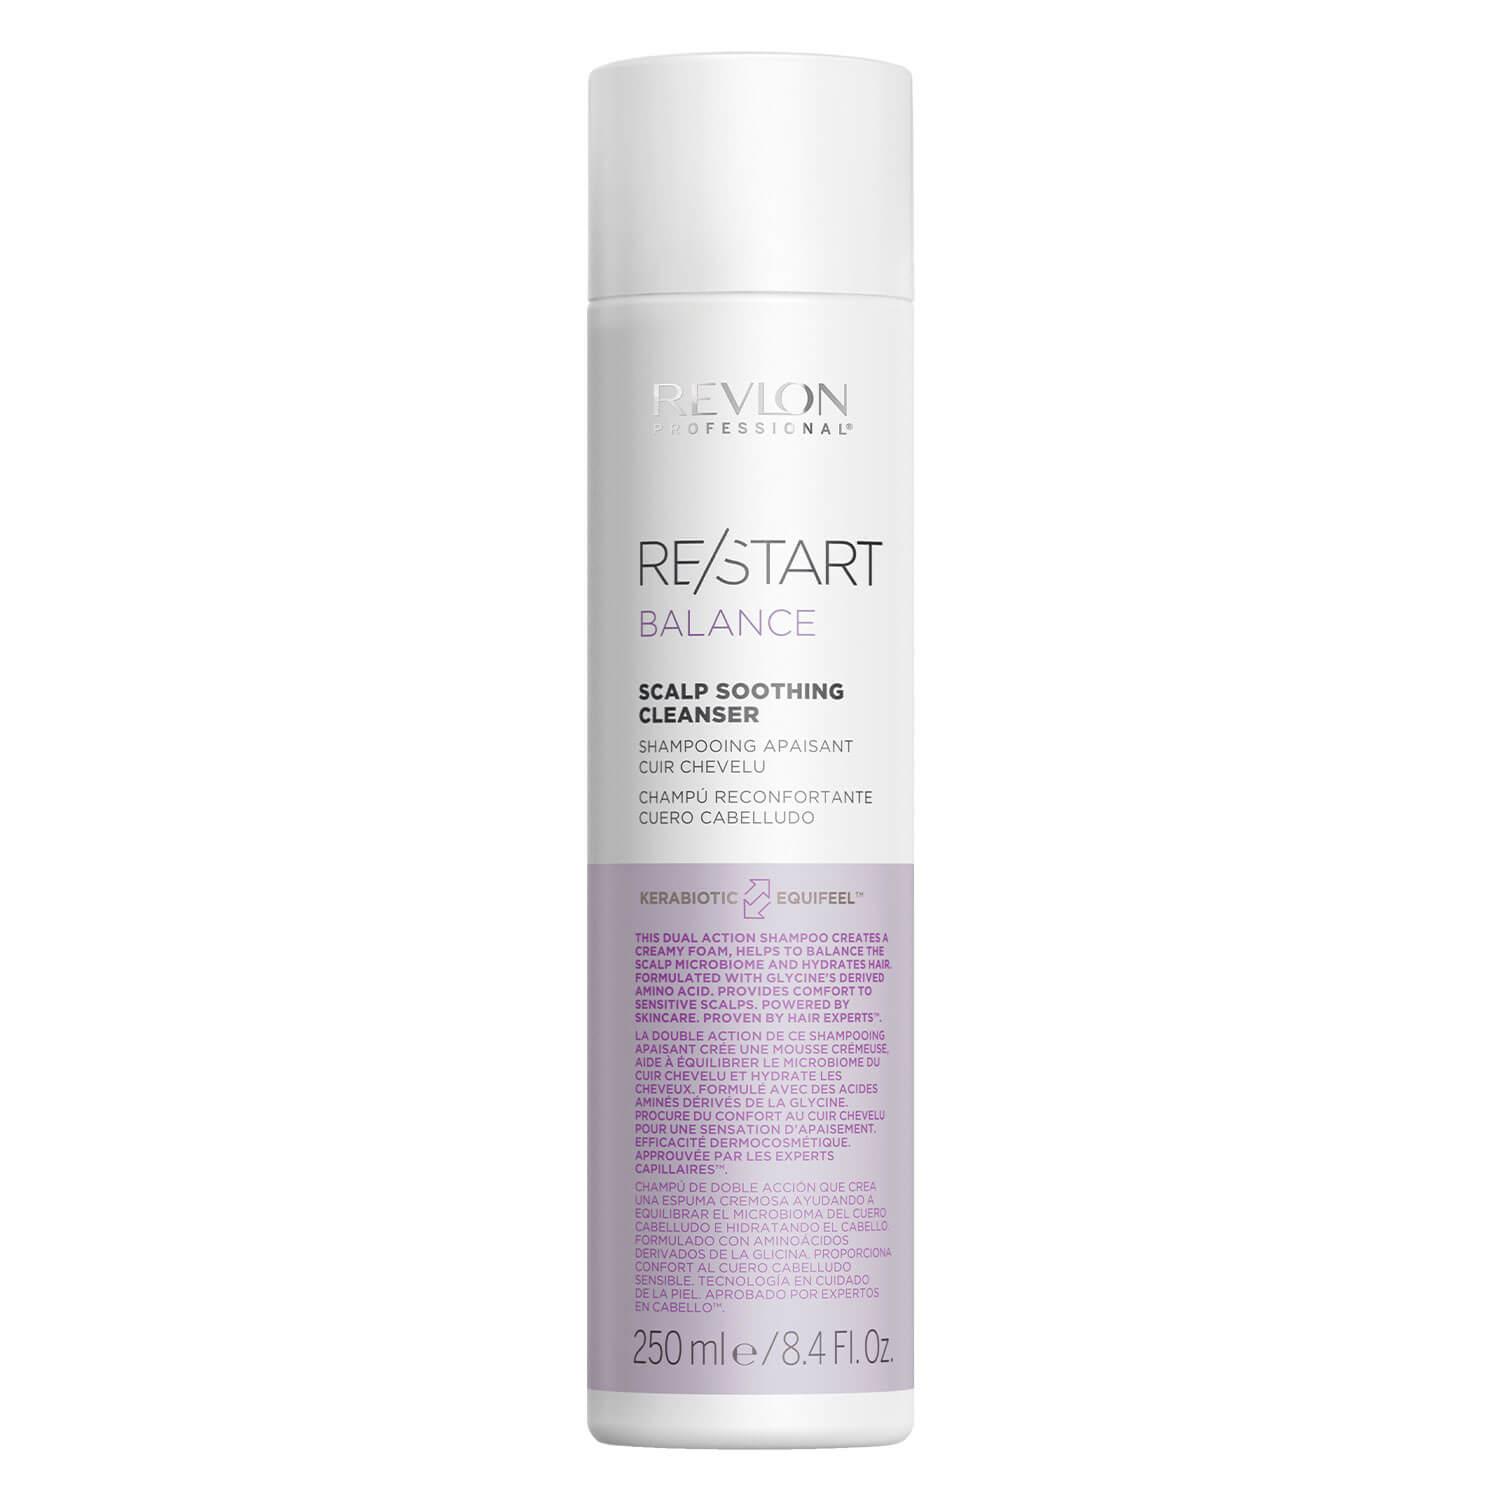 RE/START BALANCE - Scalp Soothing Cleanser